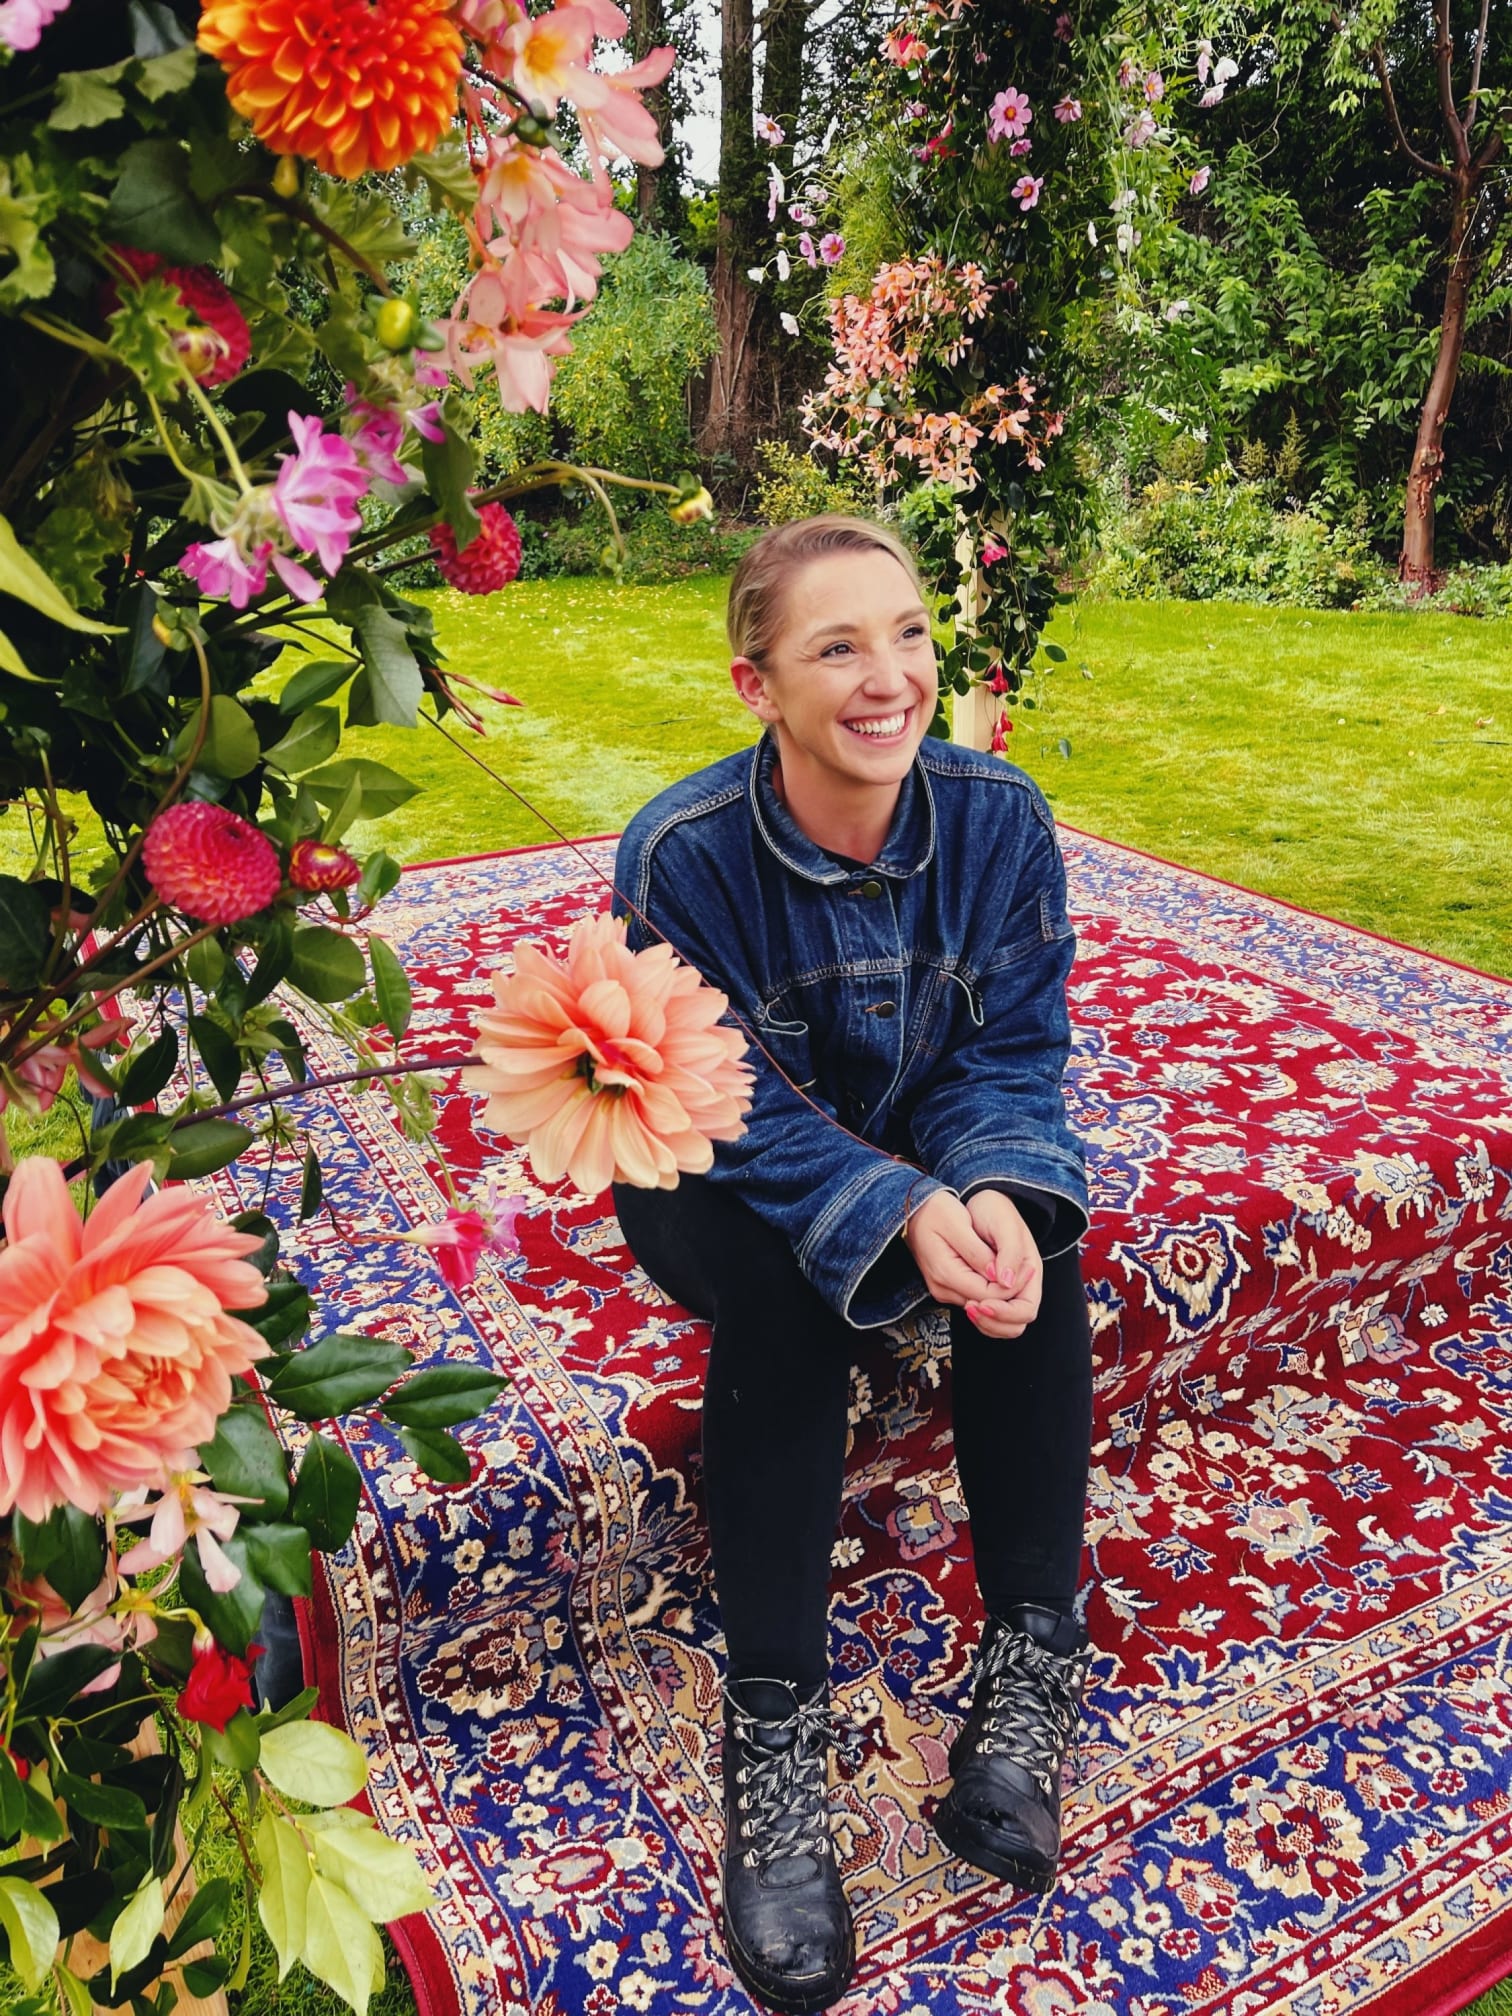 Woman sitting on a patterned rug in a garden with peach flowers in the photo